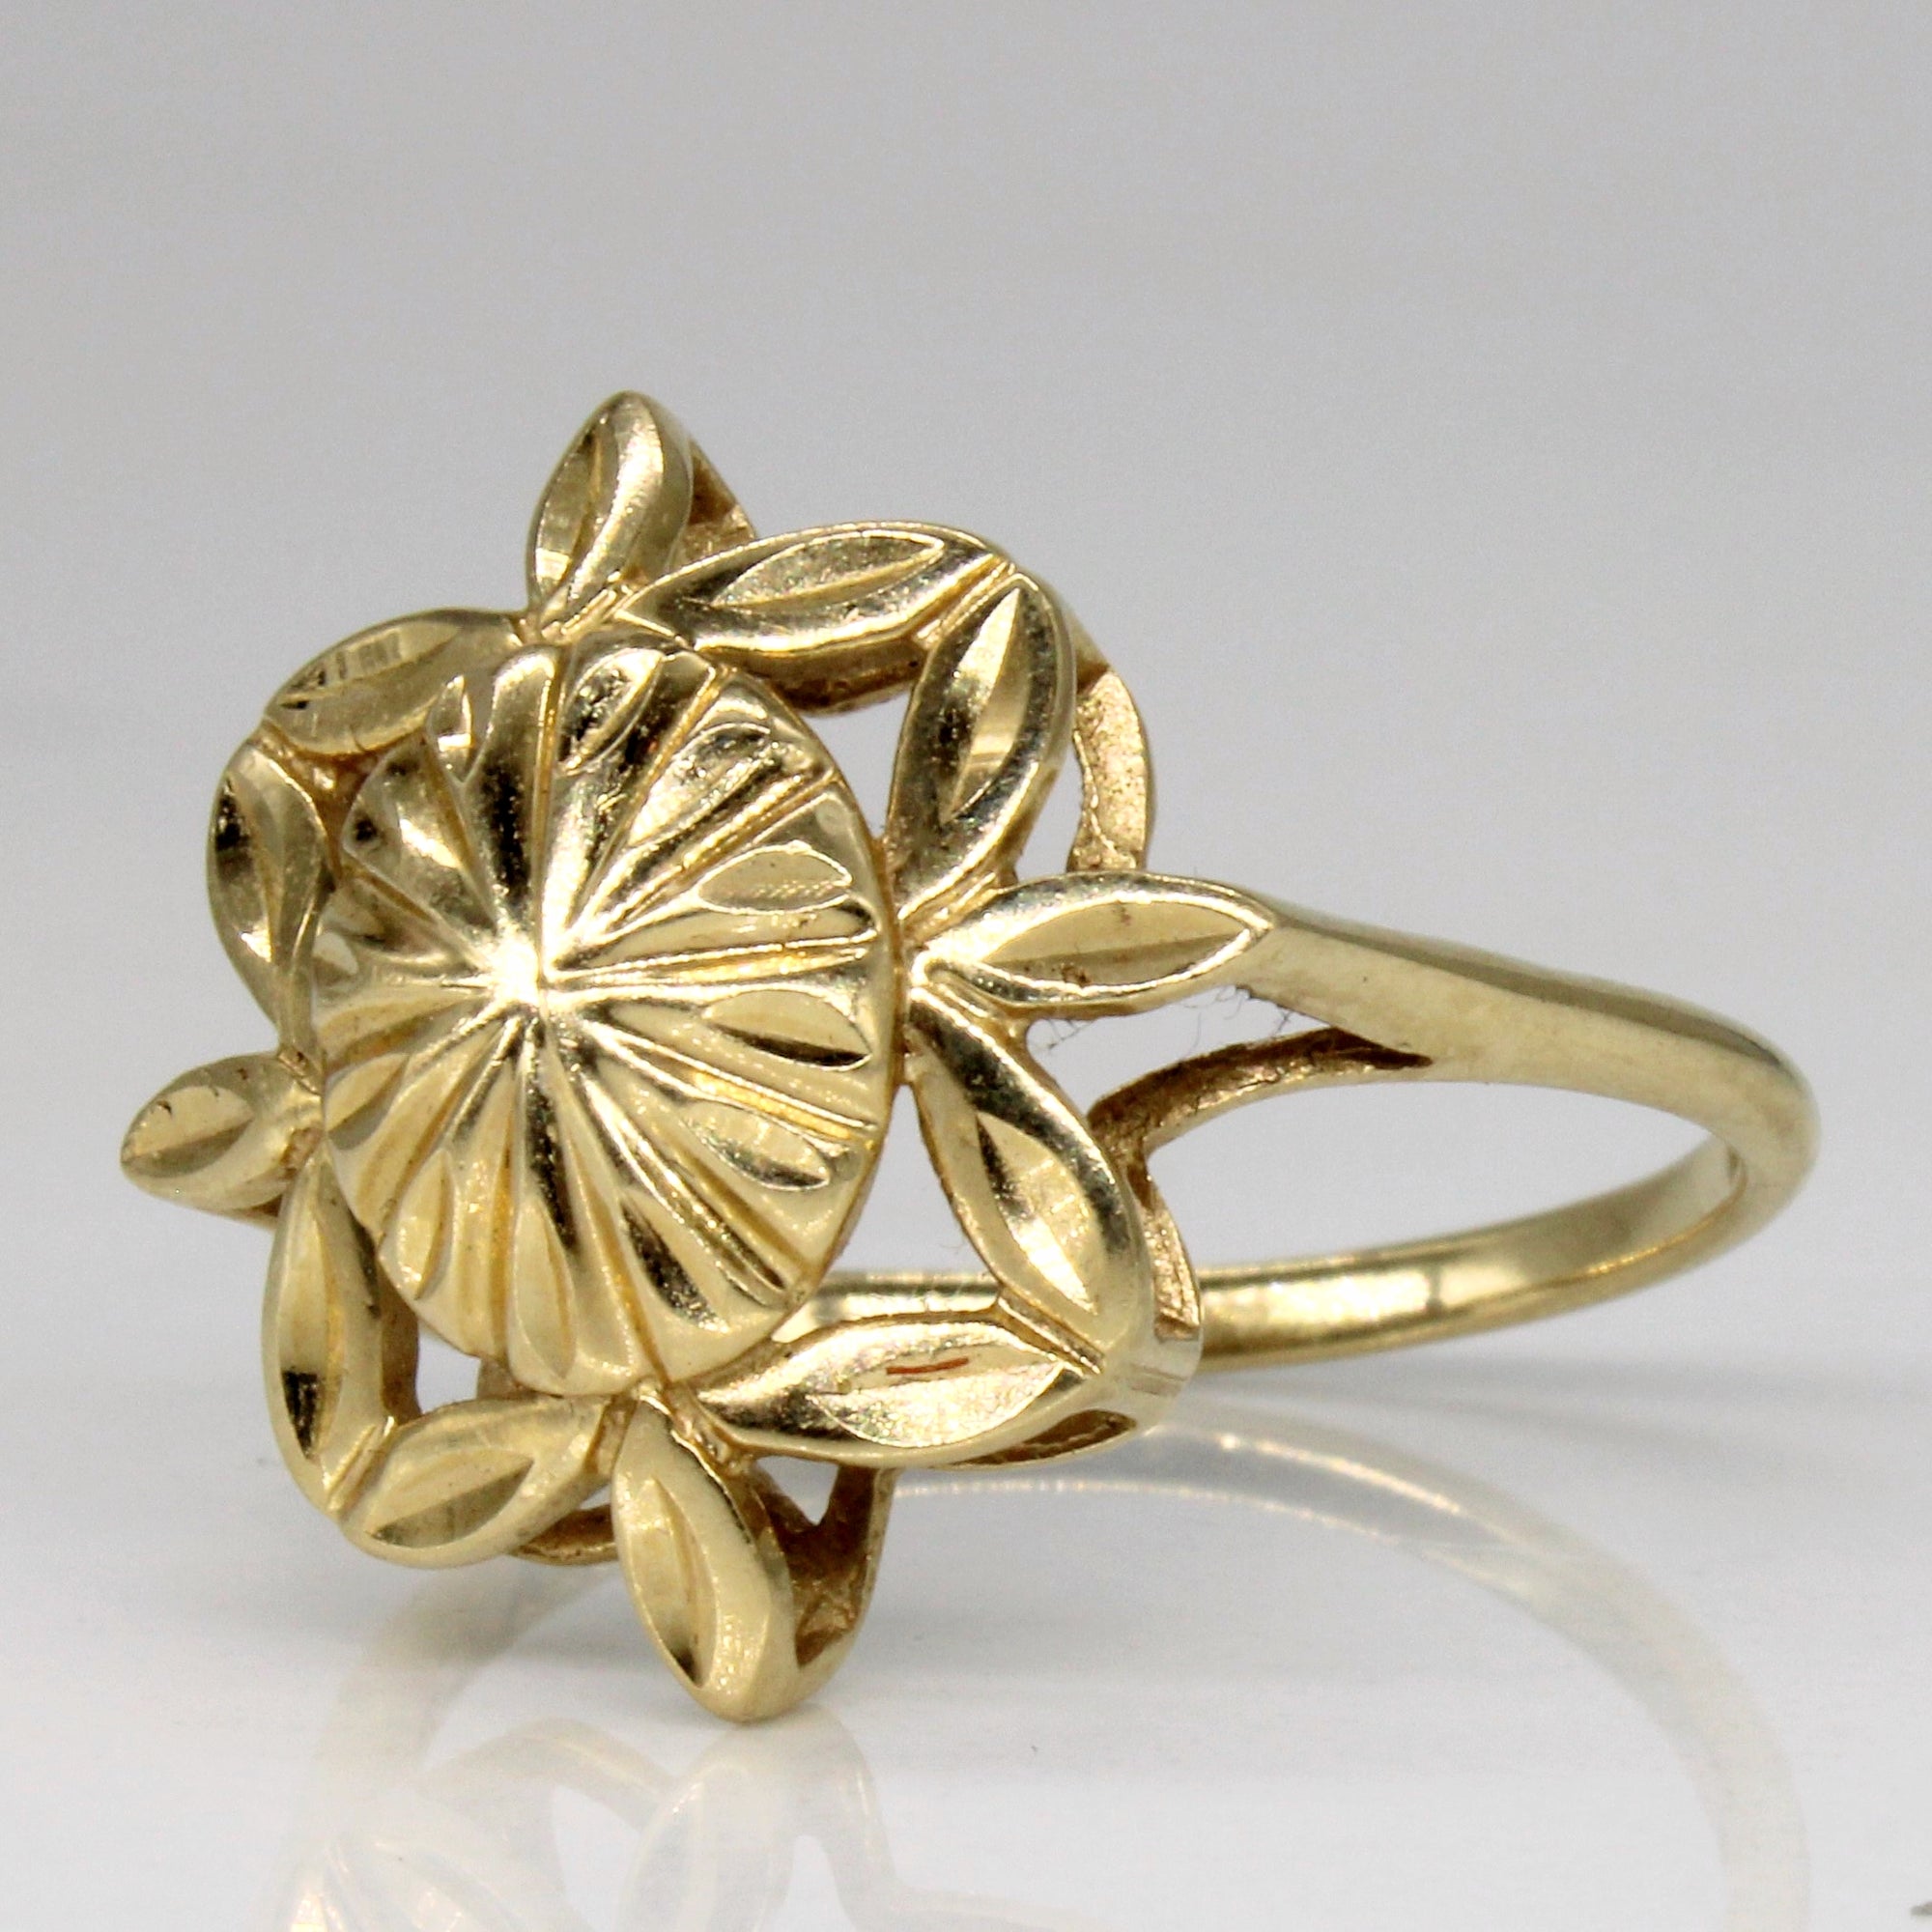 14k Yellow Gold Cocktail Ring | SZ 7.25 |